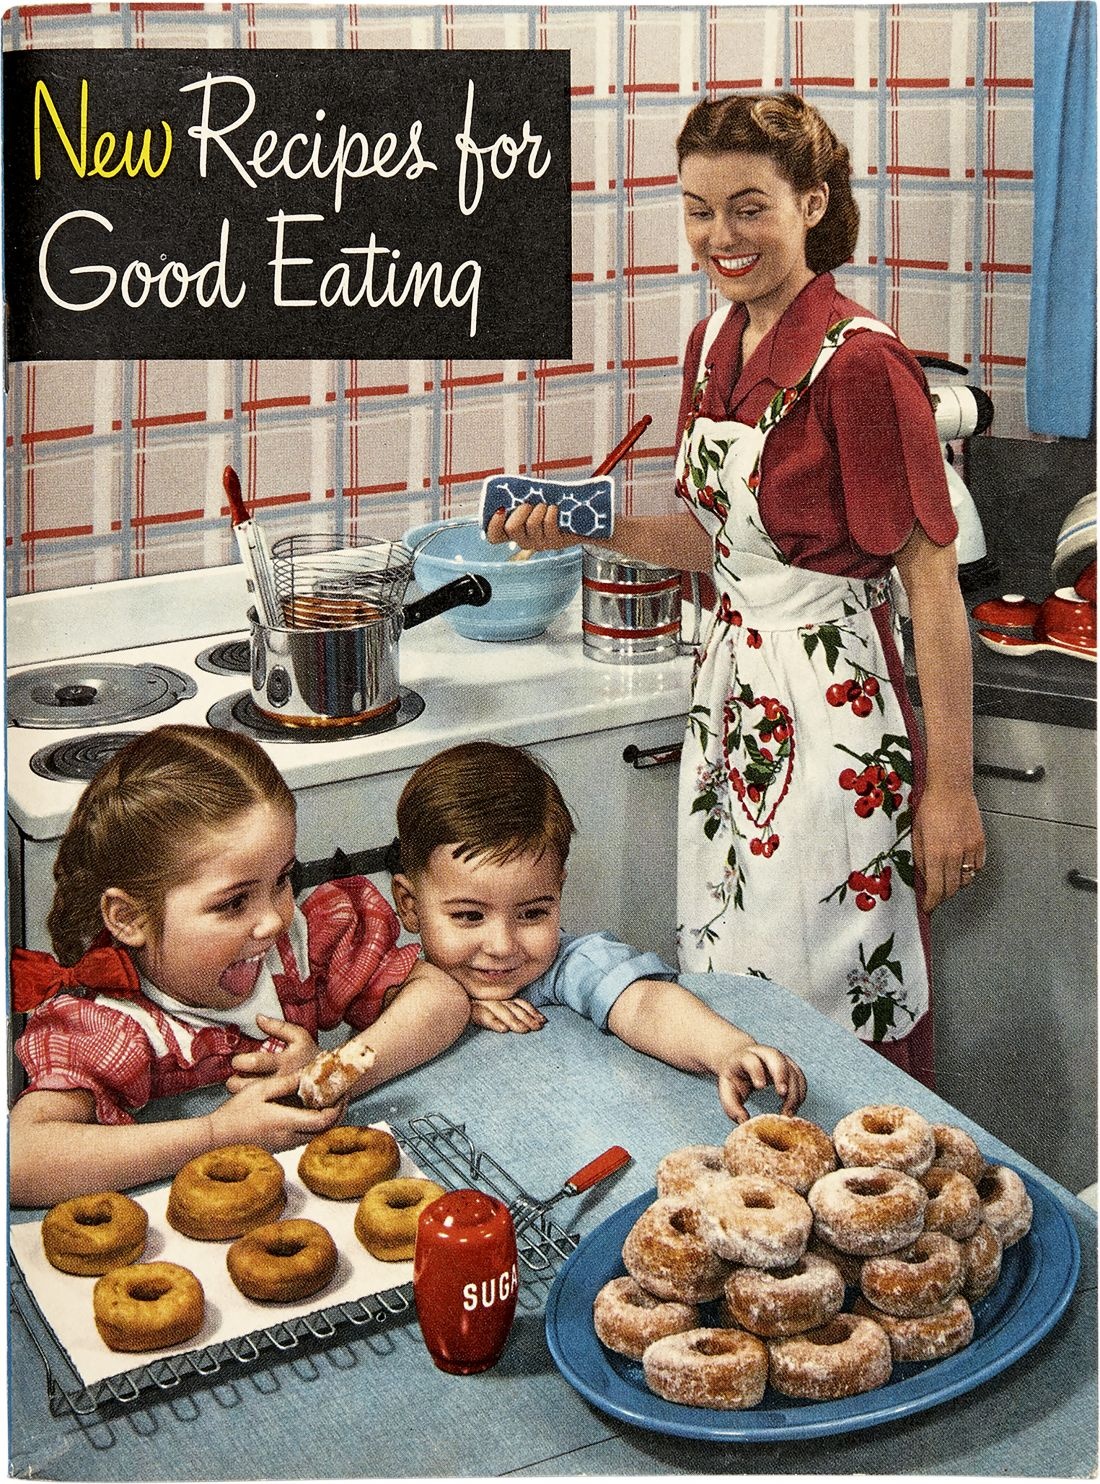 Photographer unknown ‘New Recipes for Good Eating’ Crisco, Proctor and Gamble, Cincinnati, 1949